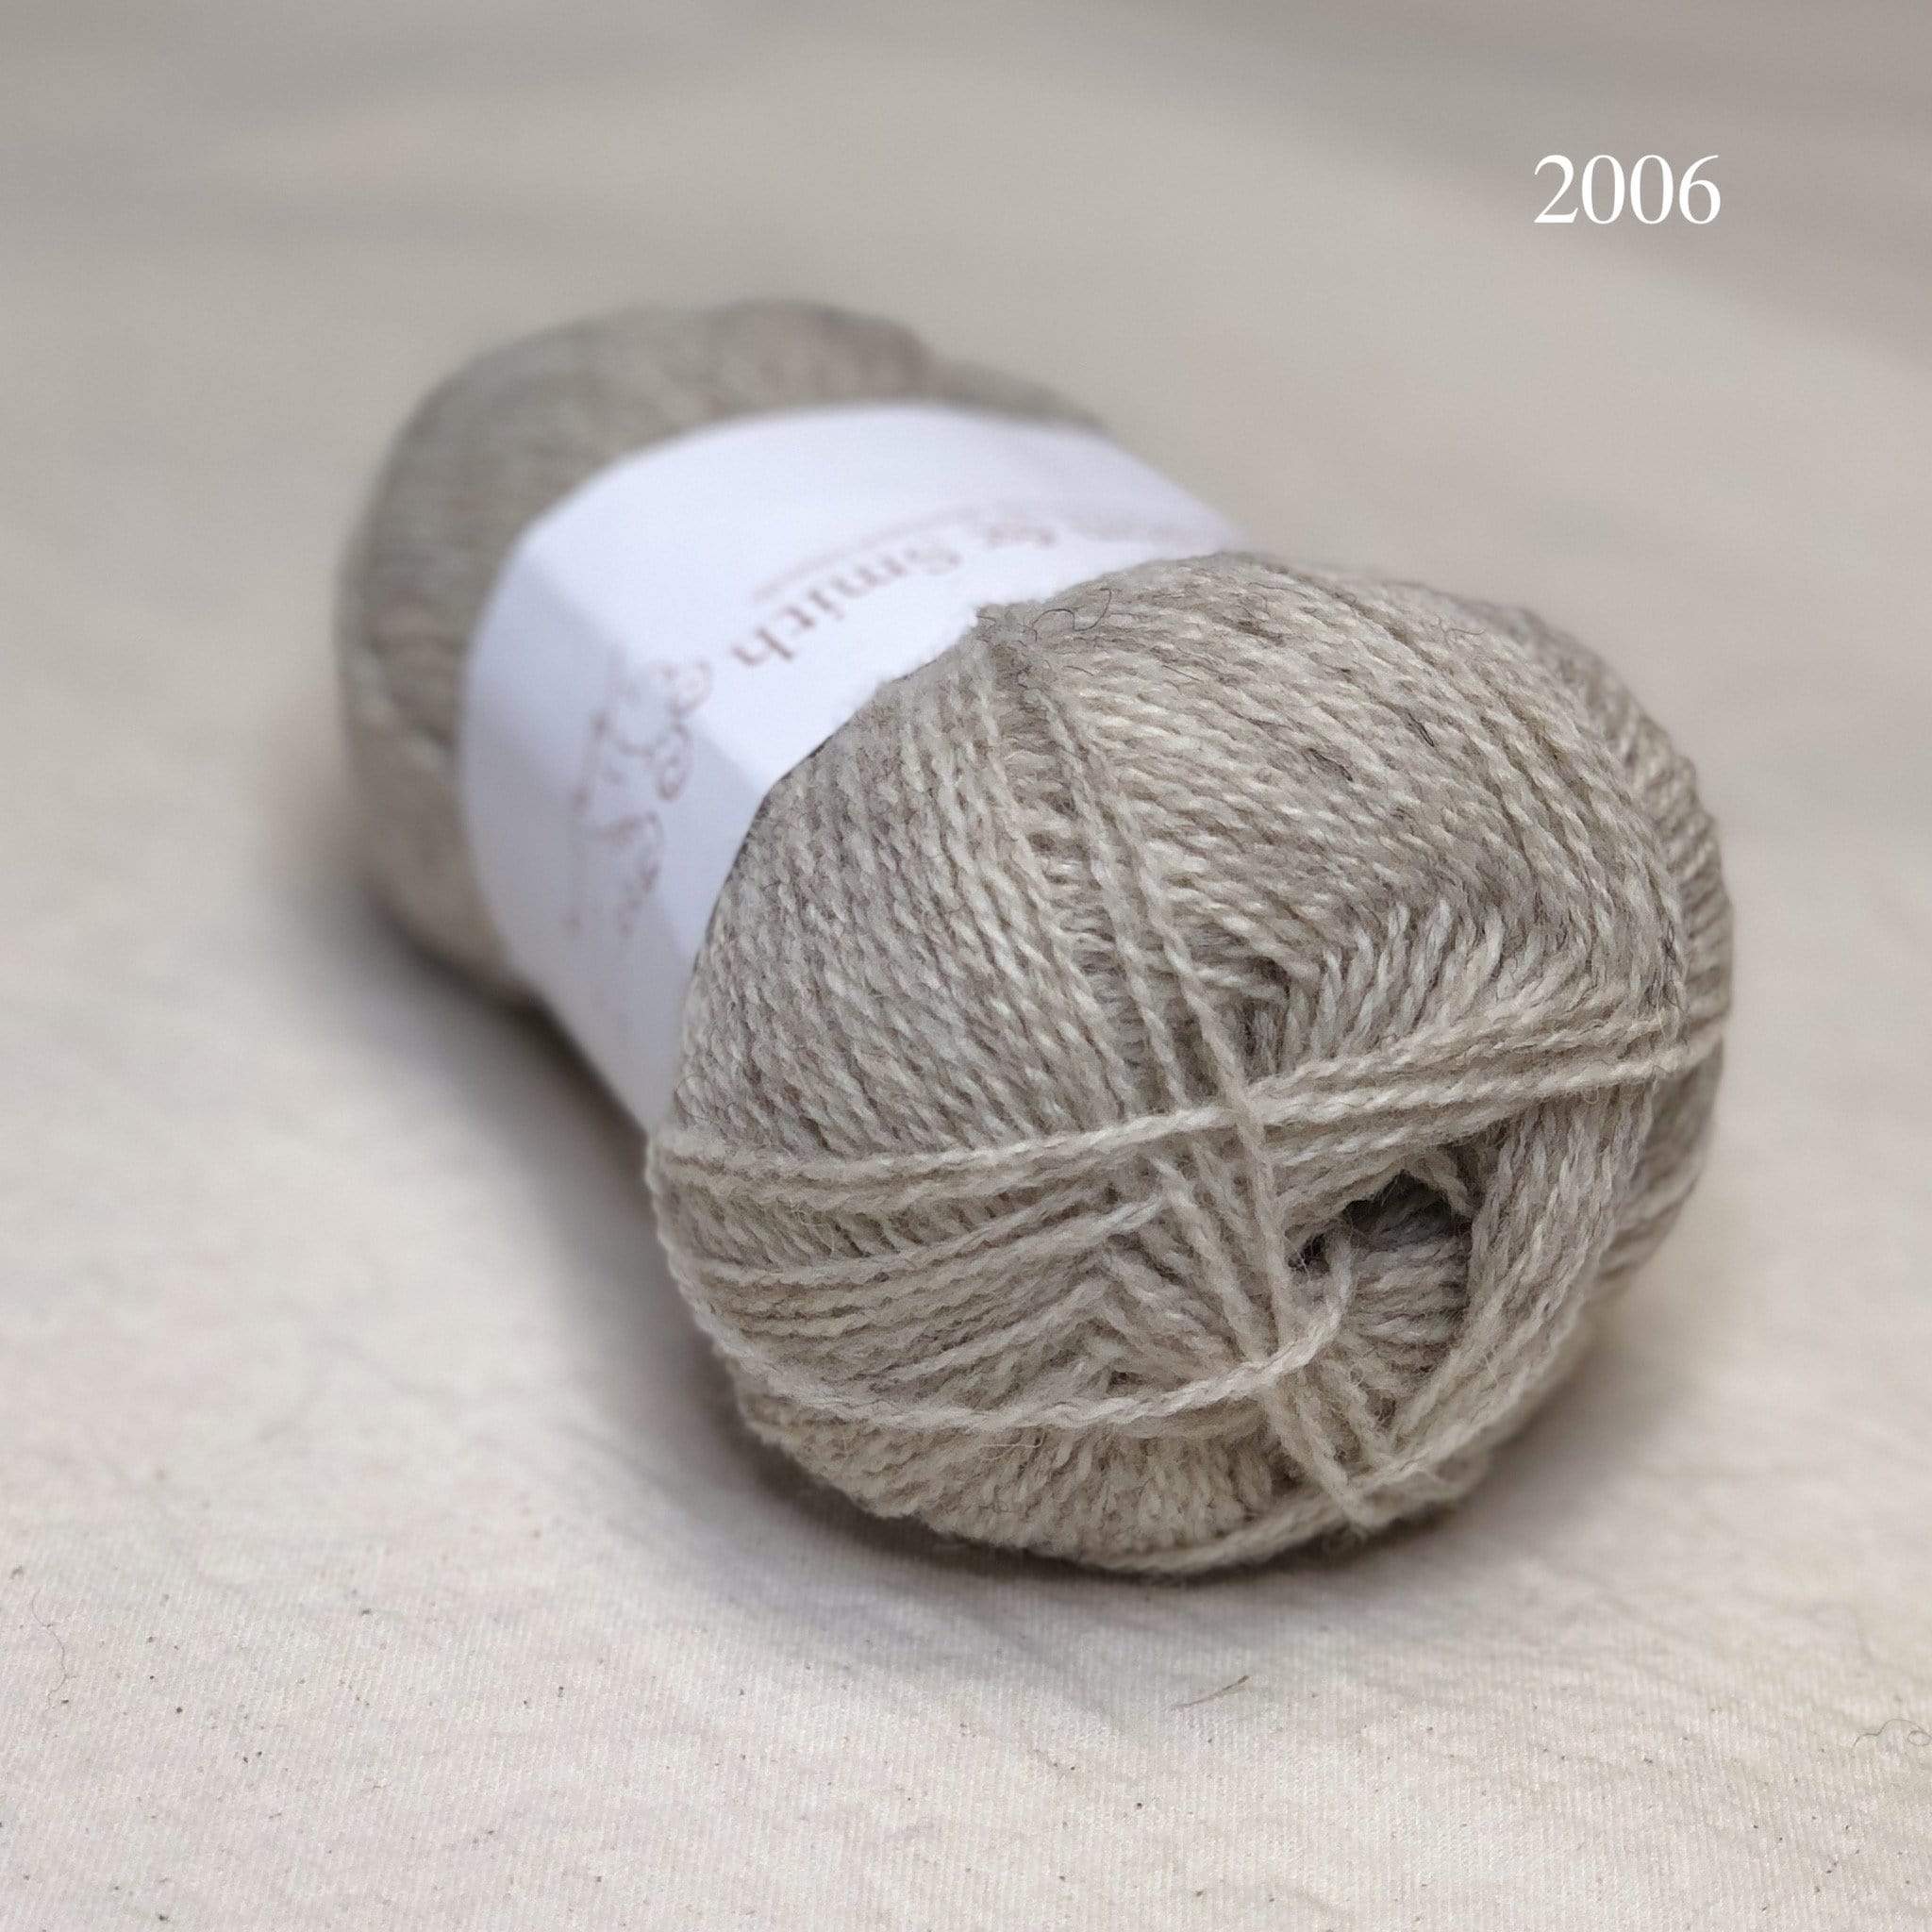 A ball of Jamieson & Smith Shetland Supreme, a fingering weight wool yarn, in color 2006, Gaulmogit, a very light grey